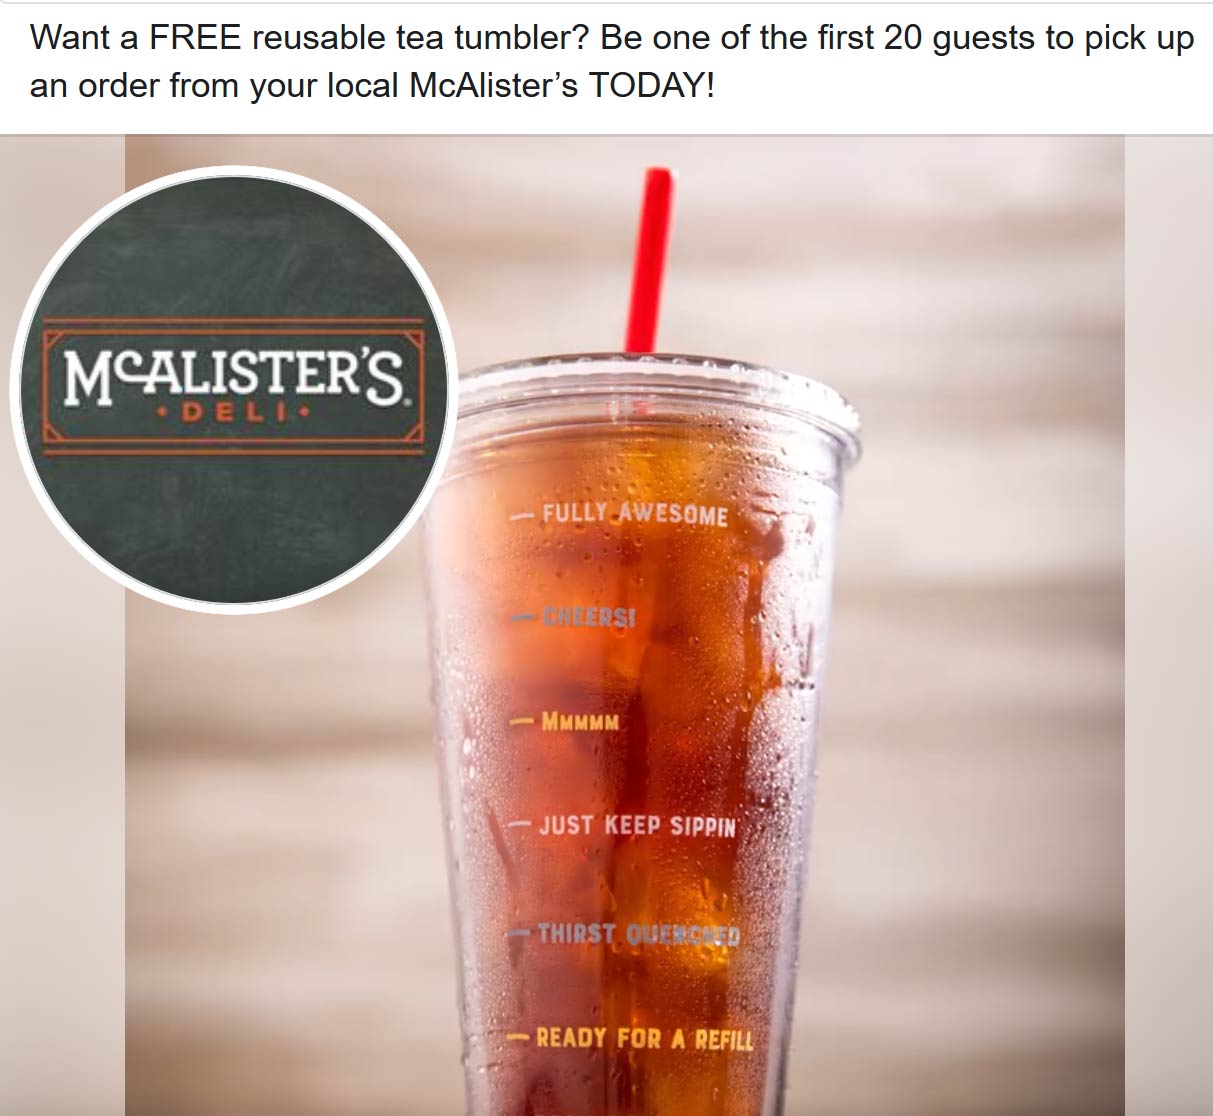 McAlisters Deli restaurants Coupon  First 20 score a free tea tumbler today at all McAlisters Deli restaurants #mcalistersdeli